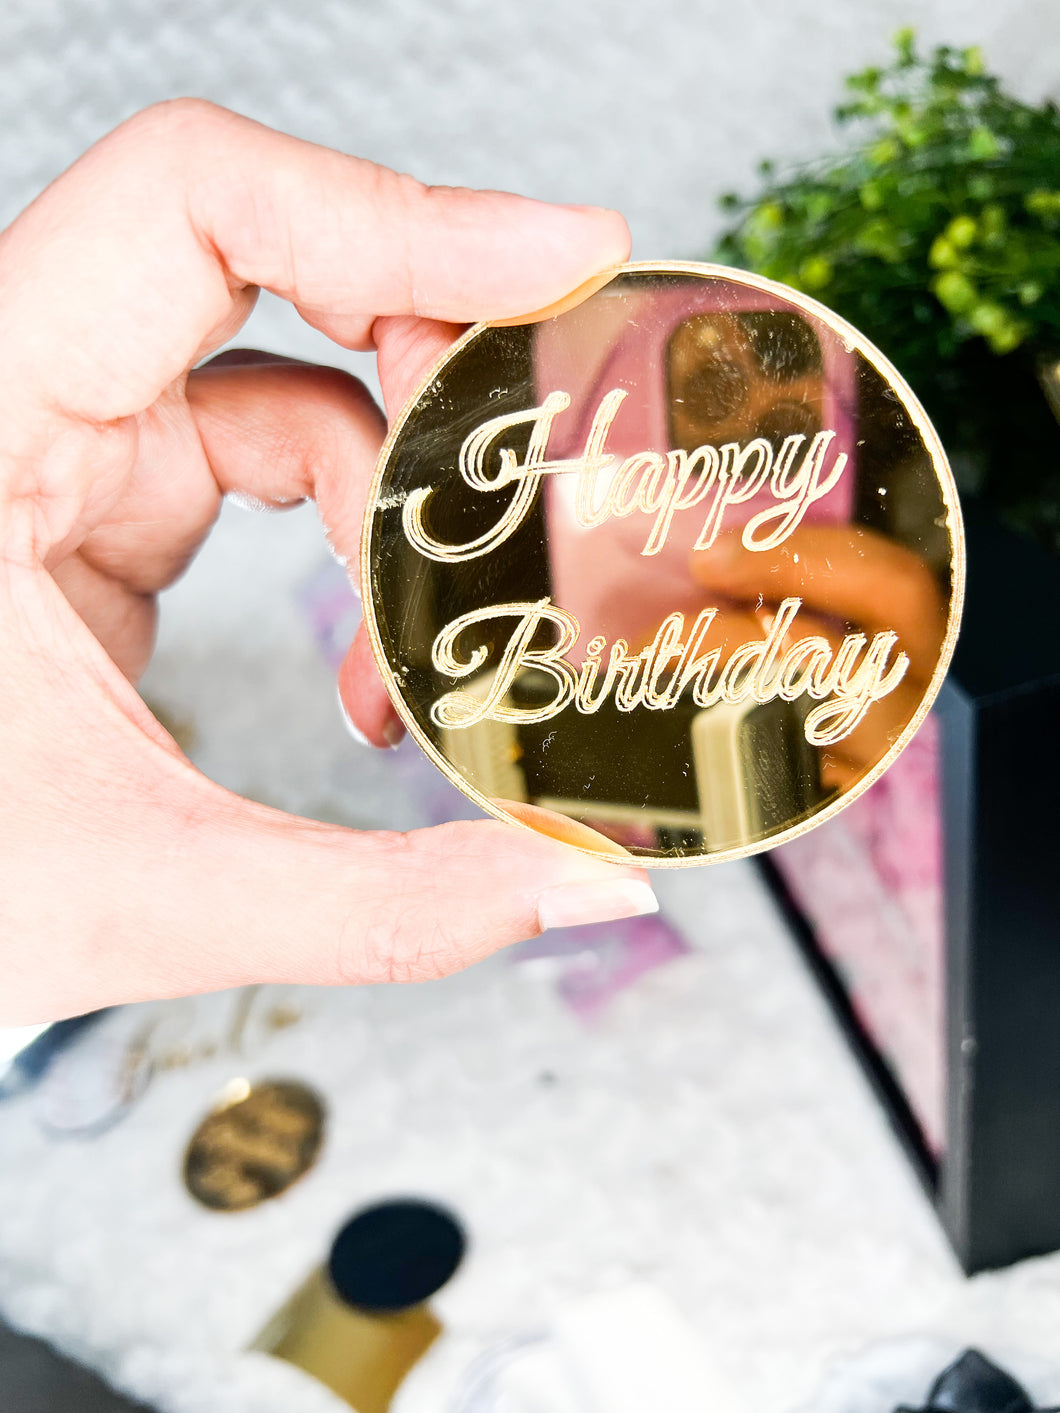 Acrylic Mirror Cupcake Toppers, Gold, Silver or Rose Gold Cupcake Discs, Engraved Mirror Acrylic Gift Tag - Set of 5